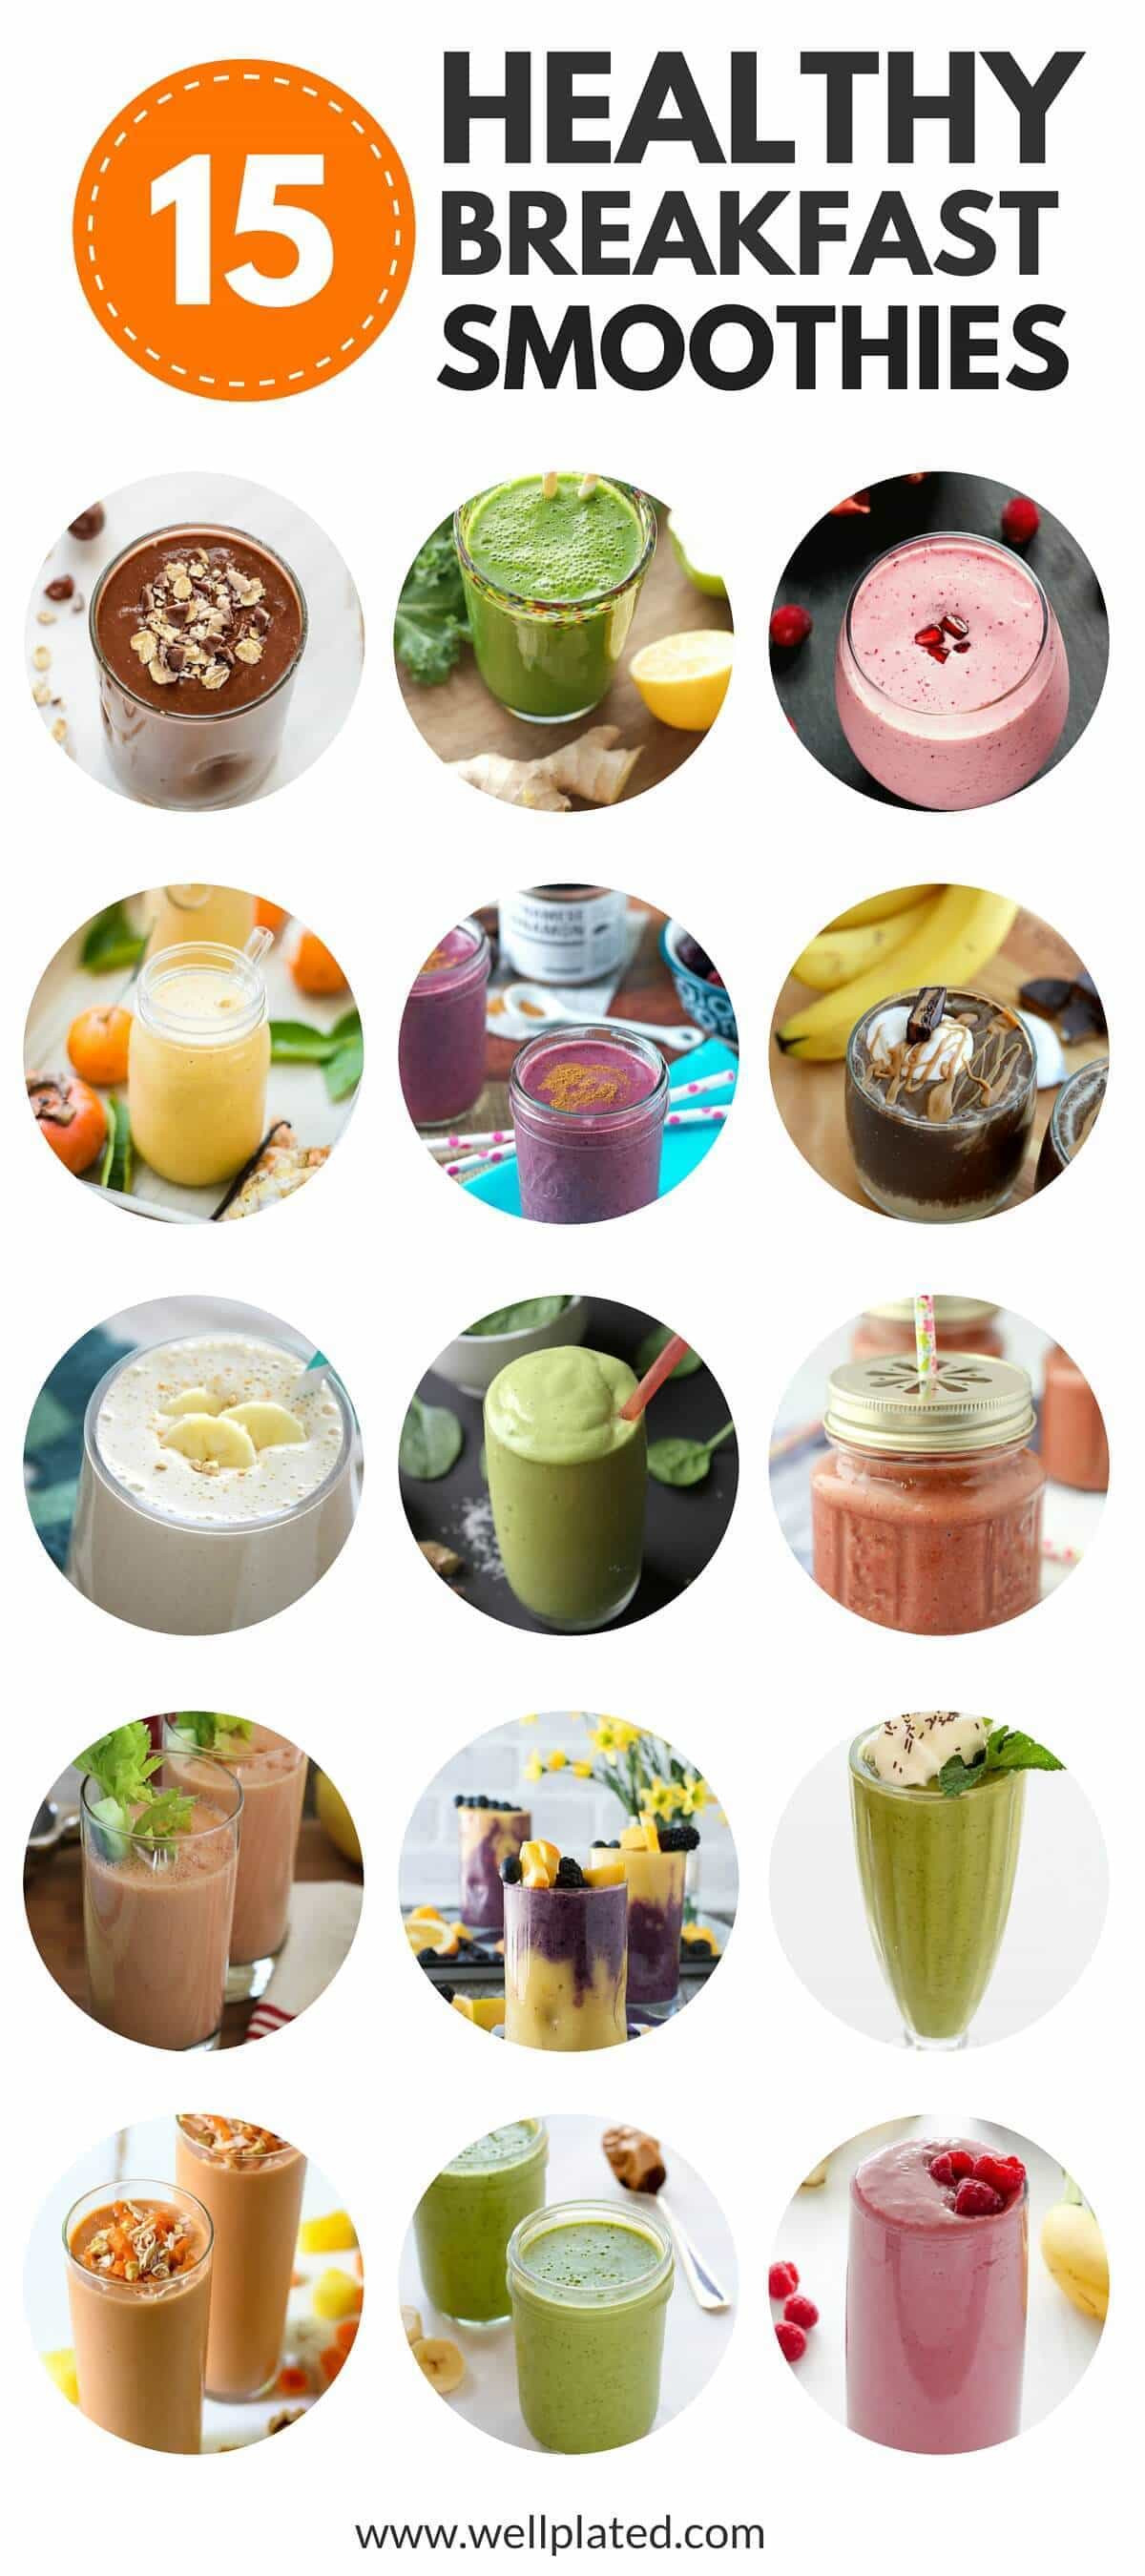 Easy Healthy Breakfast Smoothies
 The Best 15 Healthy Breakfast Smoothies